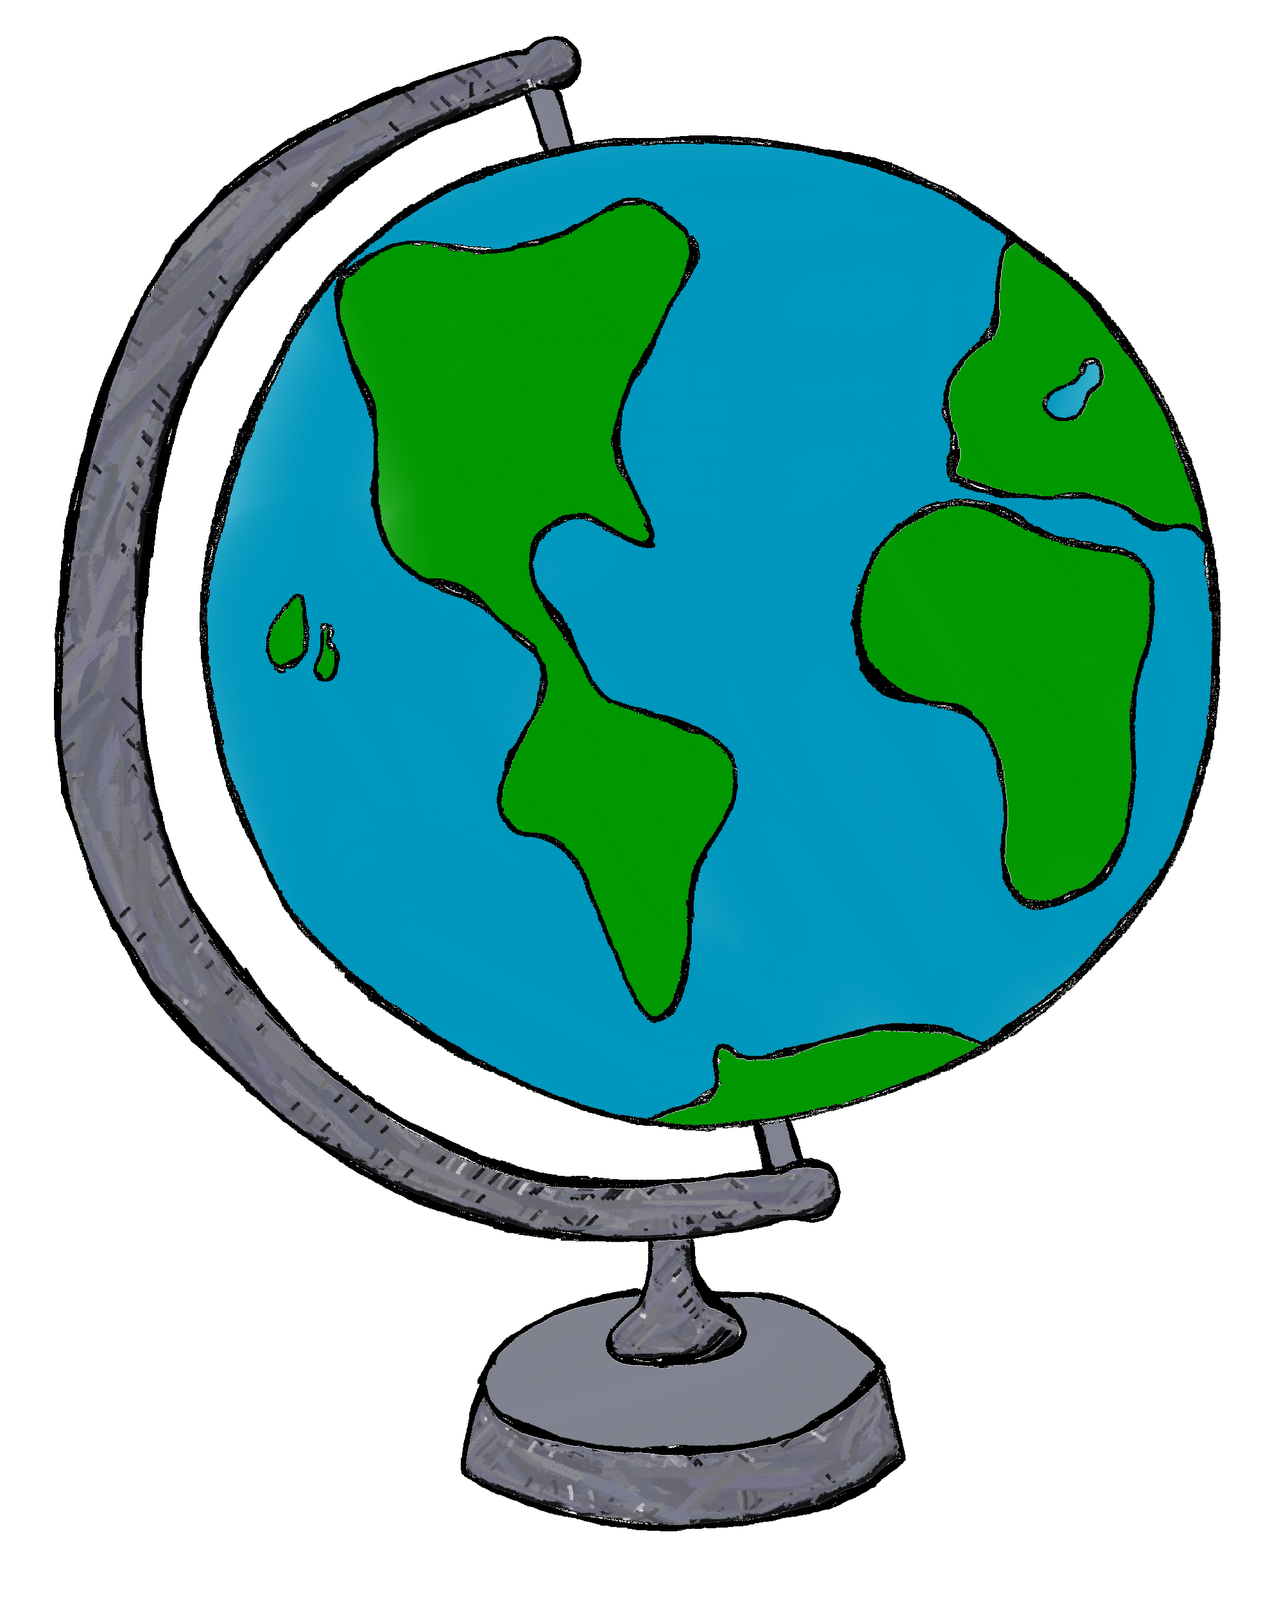 Planets clipart geography.  collection of png